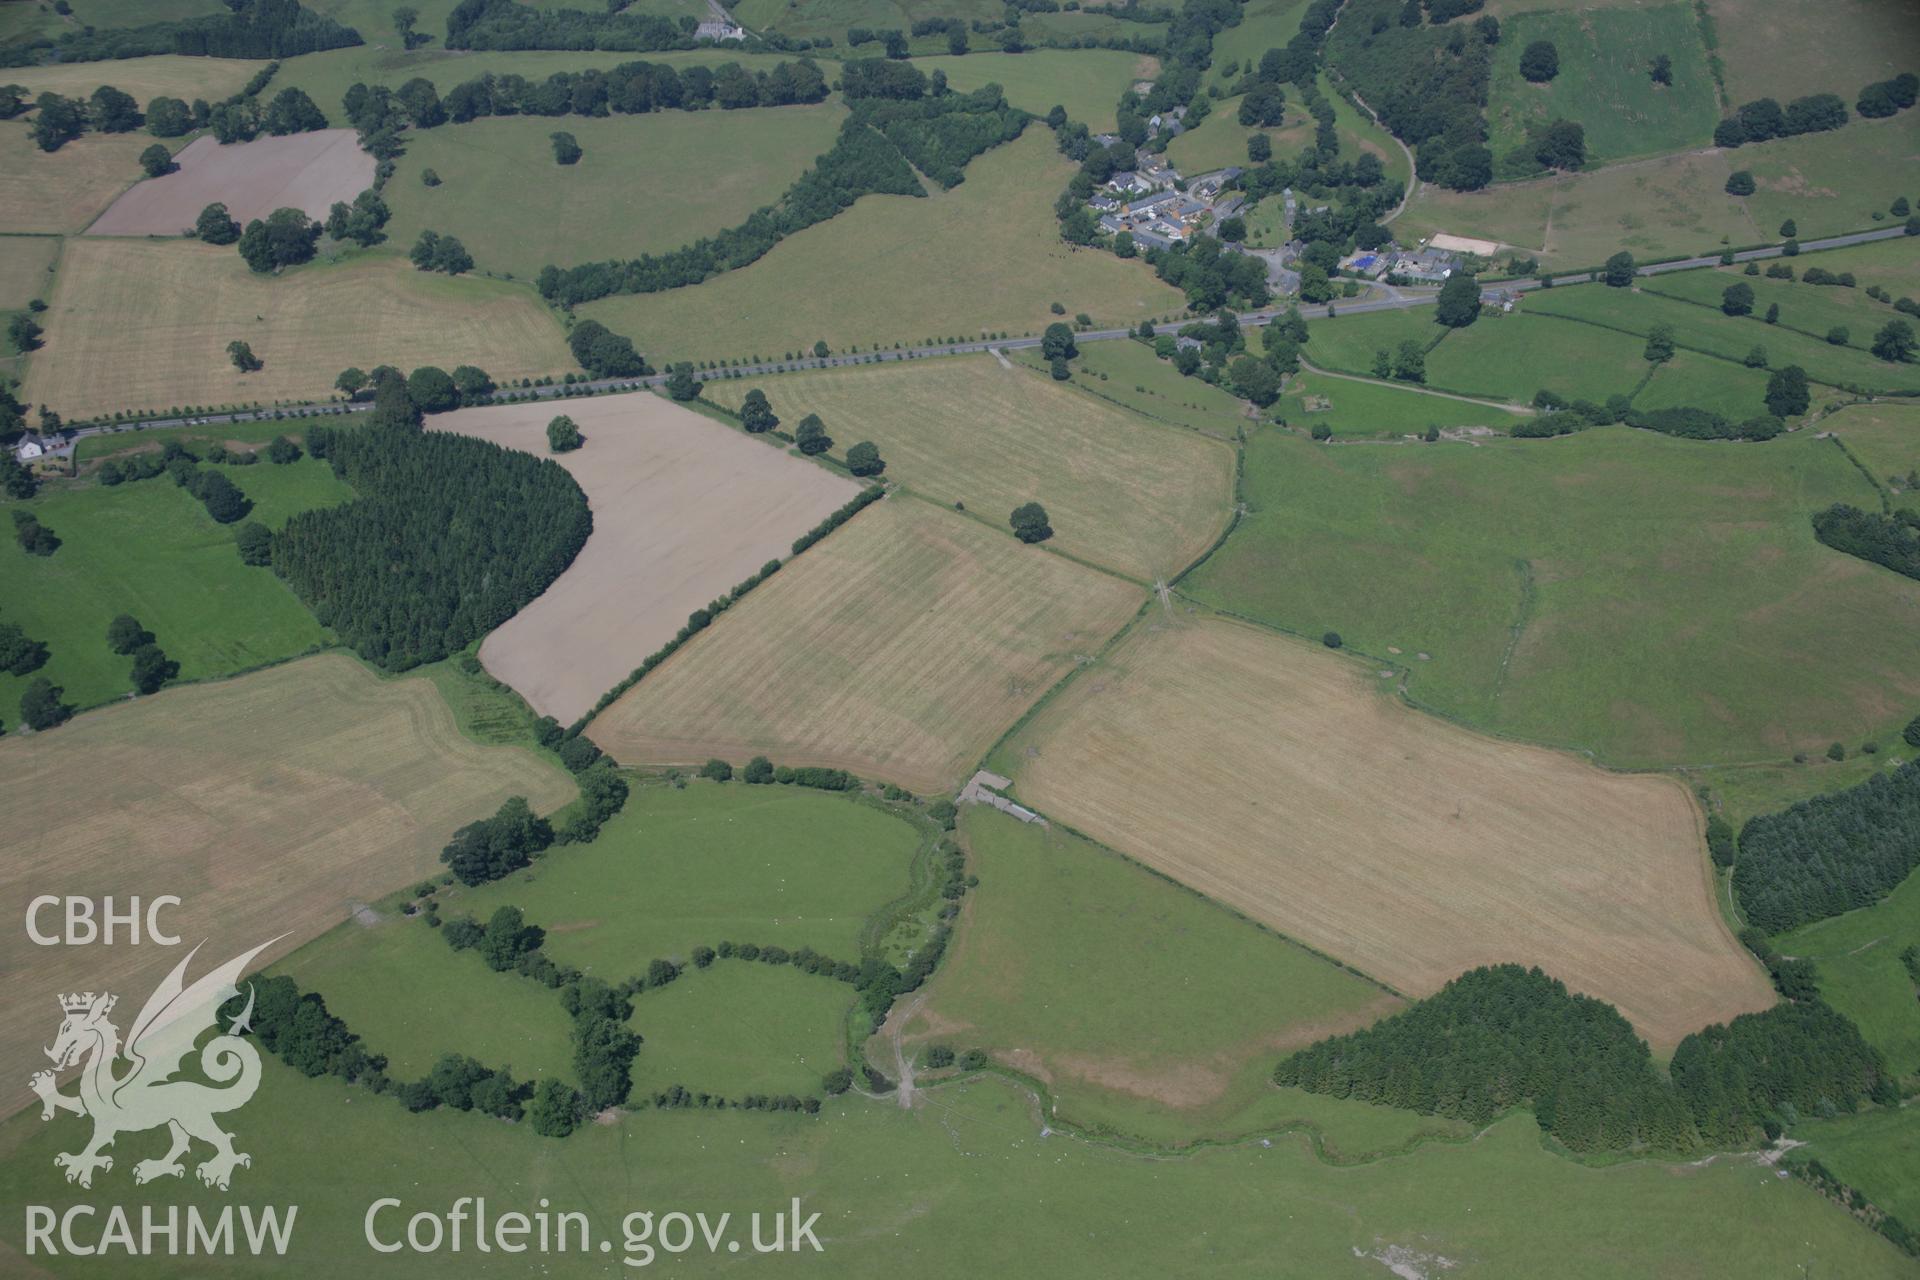 RCAHMW colour oblique aerial photograph of Llanfor Roman Fort. Taken on 18 July 2006 by Toby Driver.